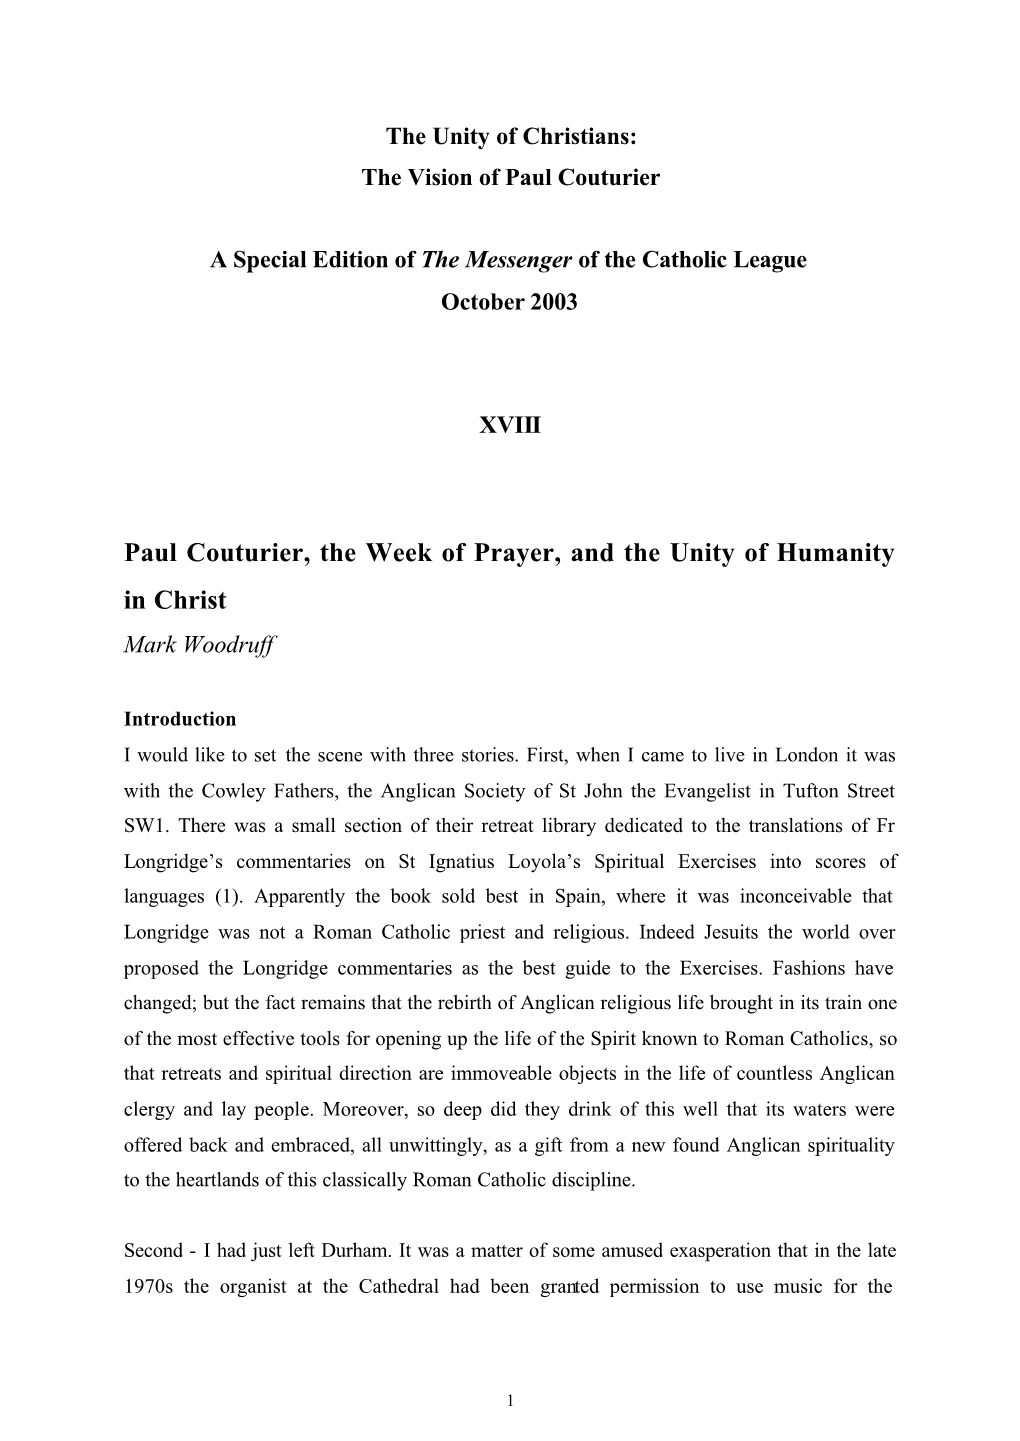 Paul Couturier, the Week of Prayer, and the Unity of Humanity in Christ Mark Woodruff